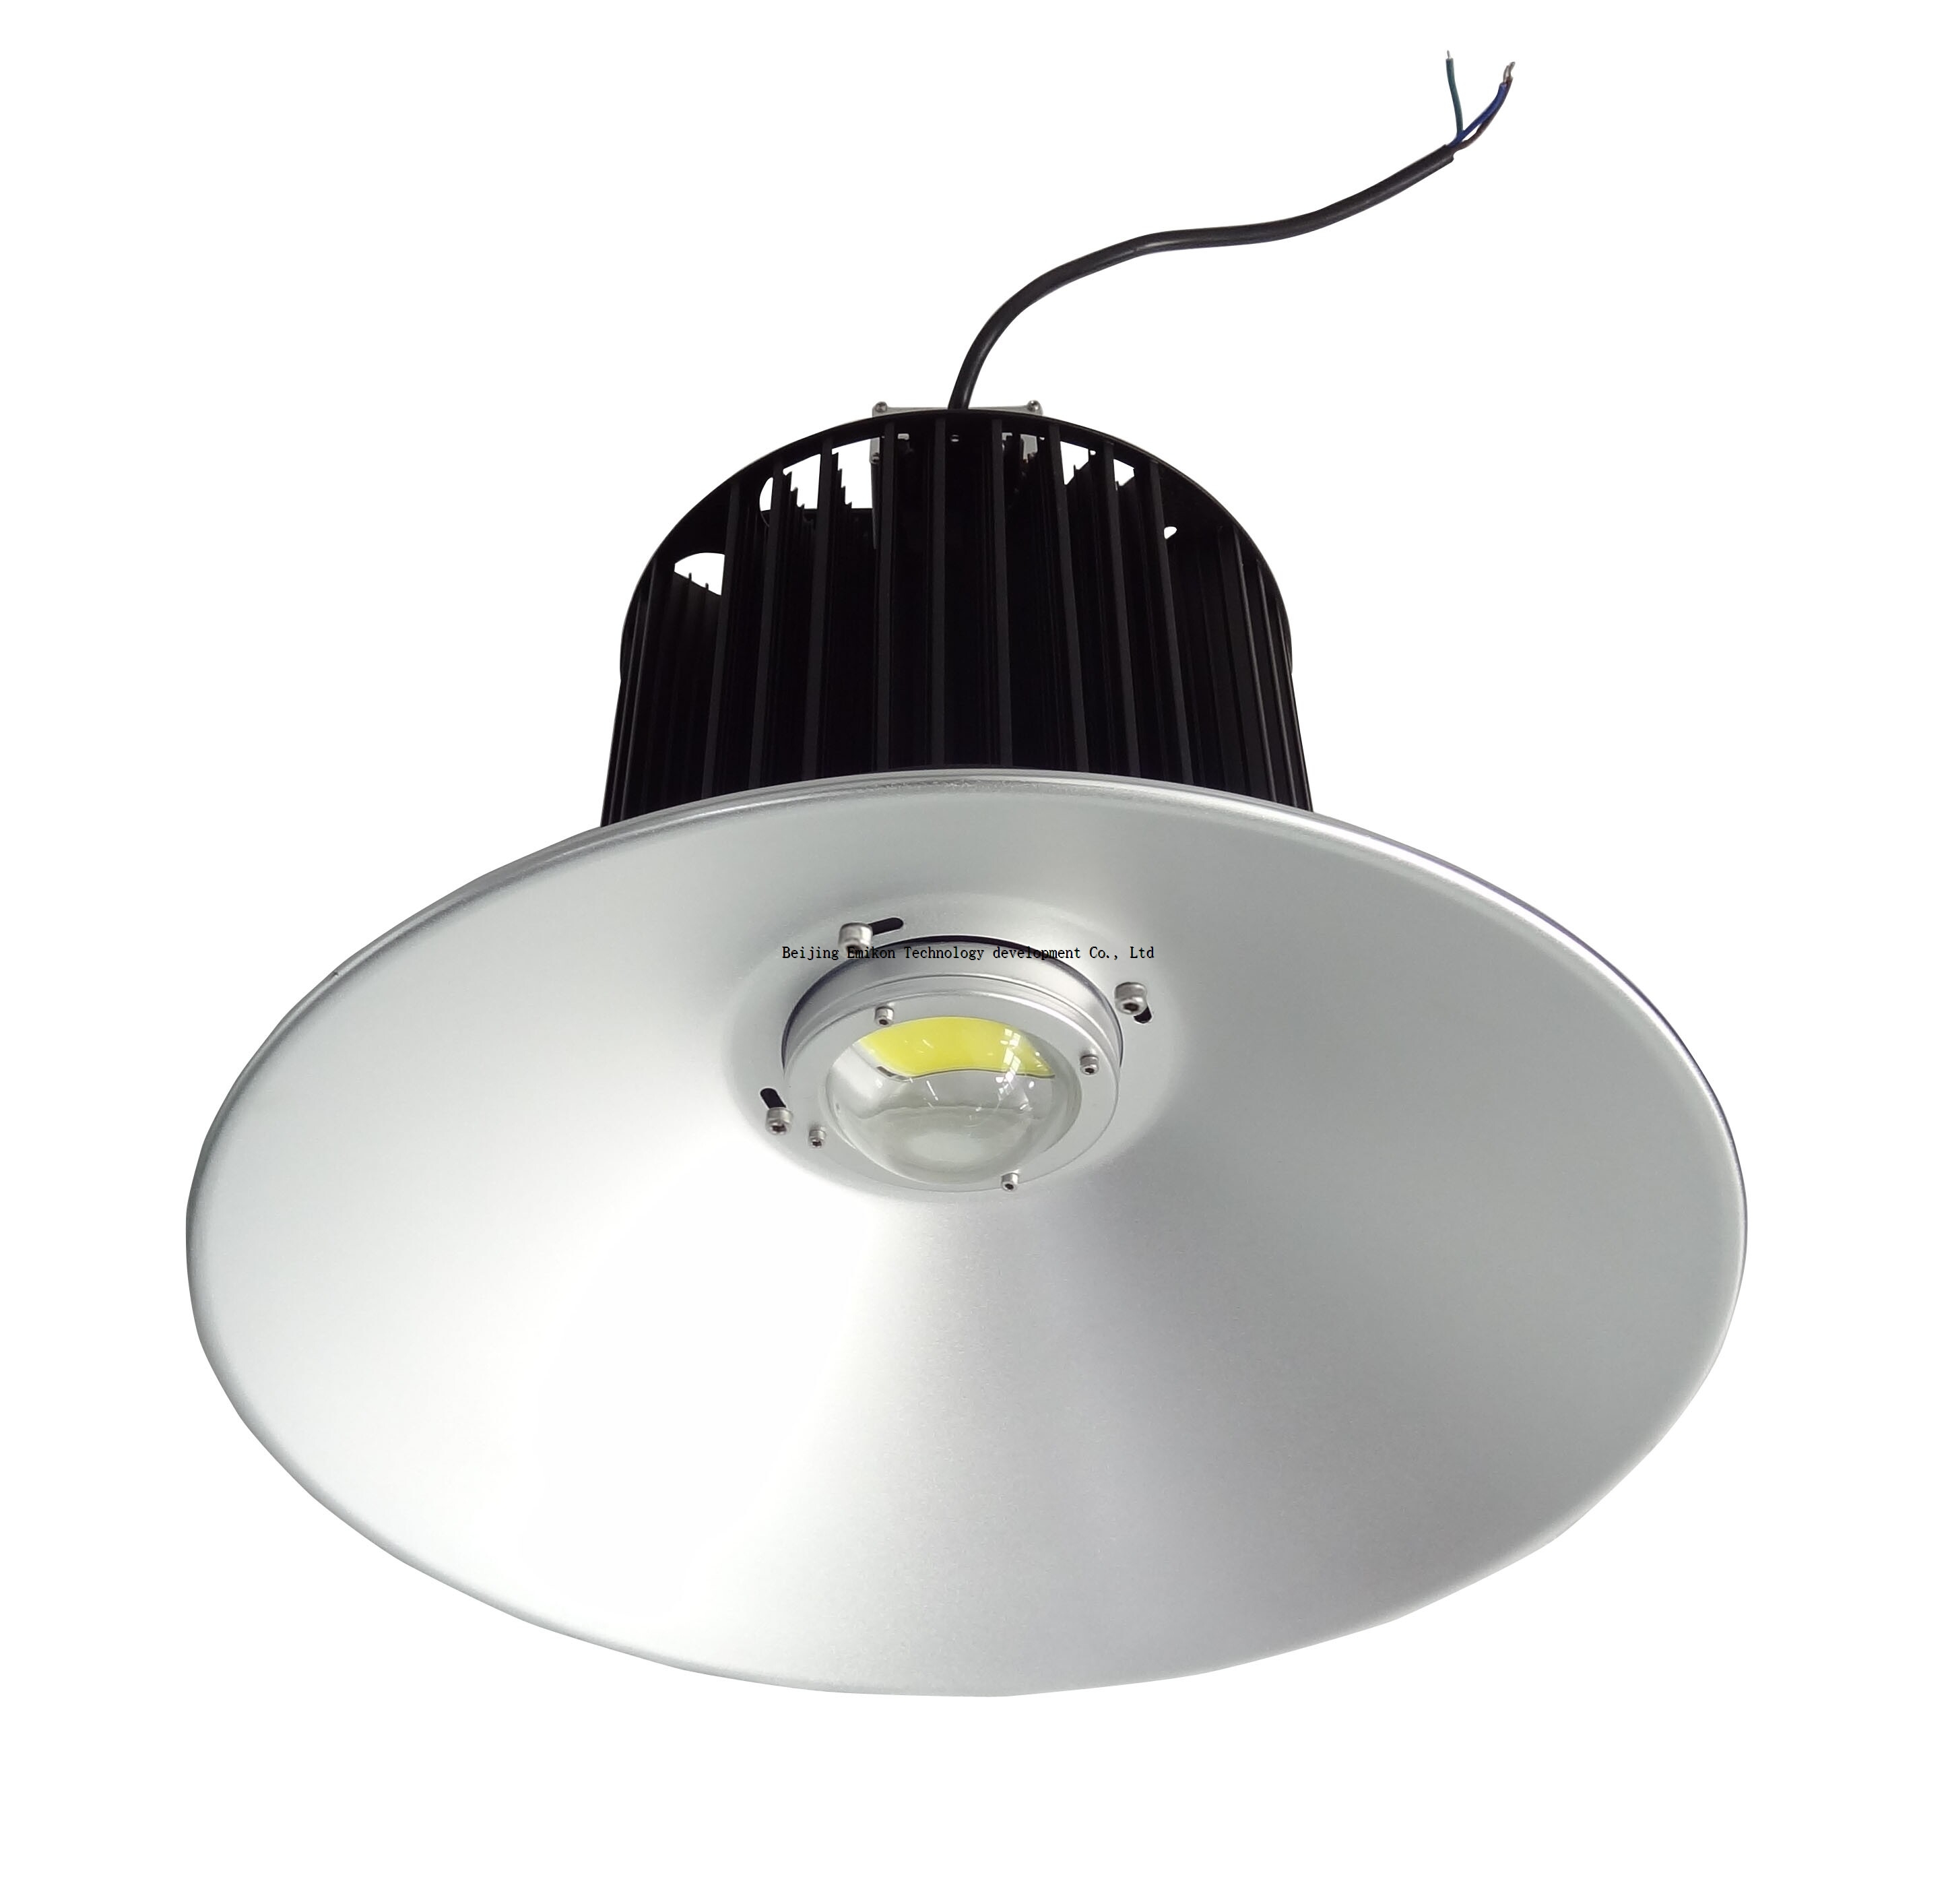 LED high bay light with 350W Power